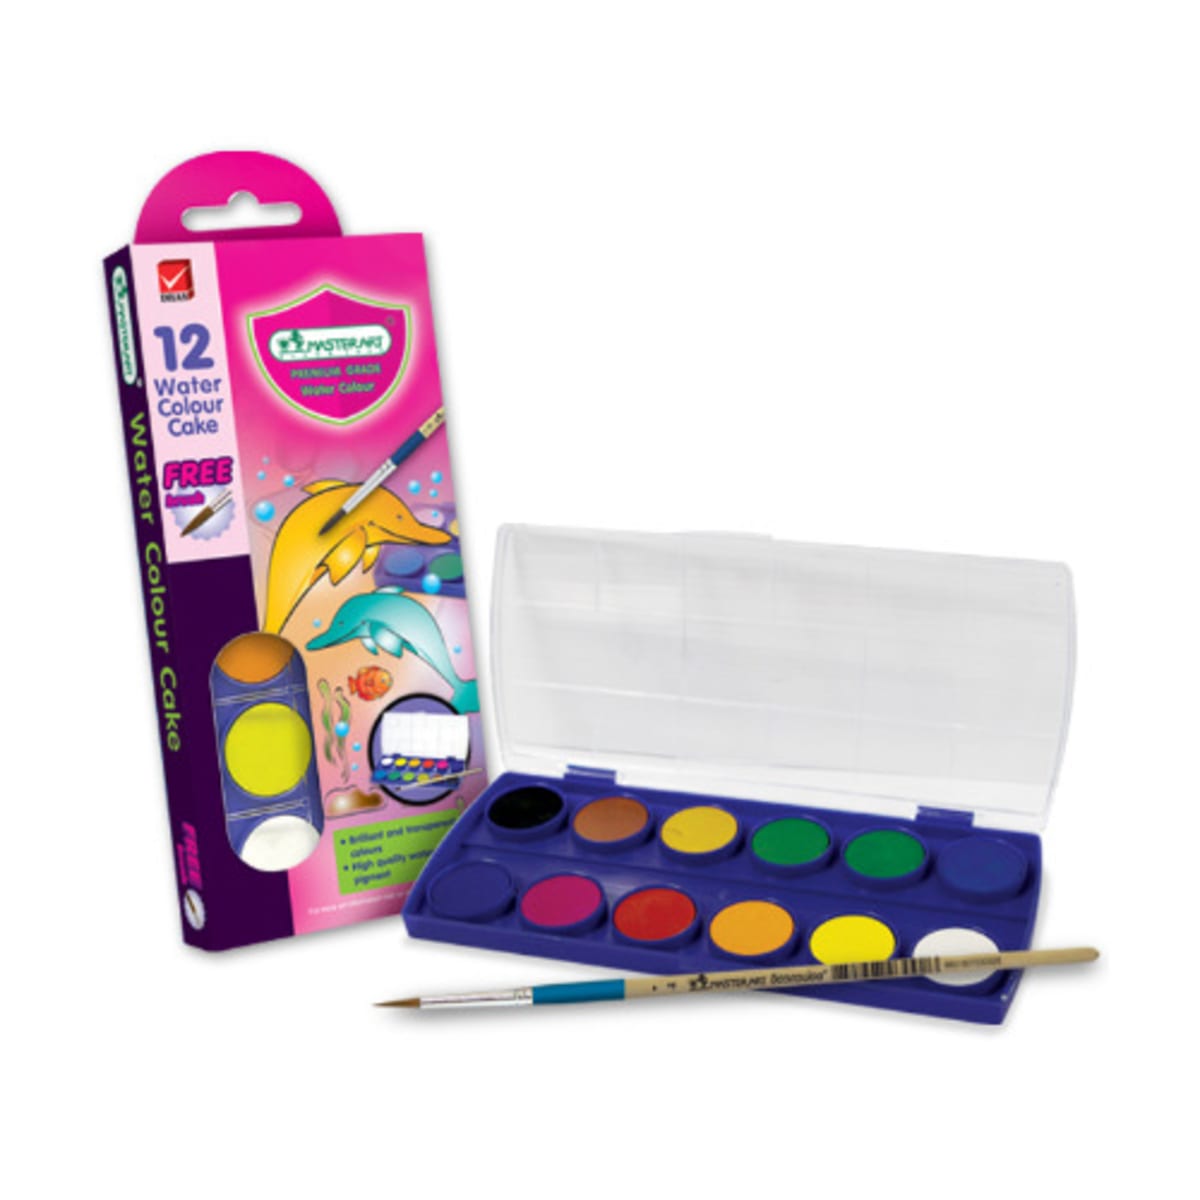 Camlin Kokuyo Student 24-Shade Water Color Paint Cake Set ( PACK OF 2 ) -  Smooth colour for